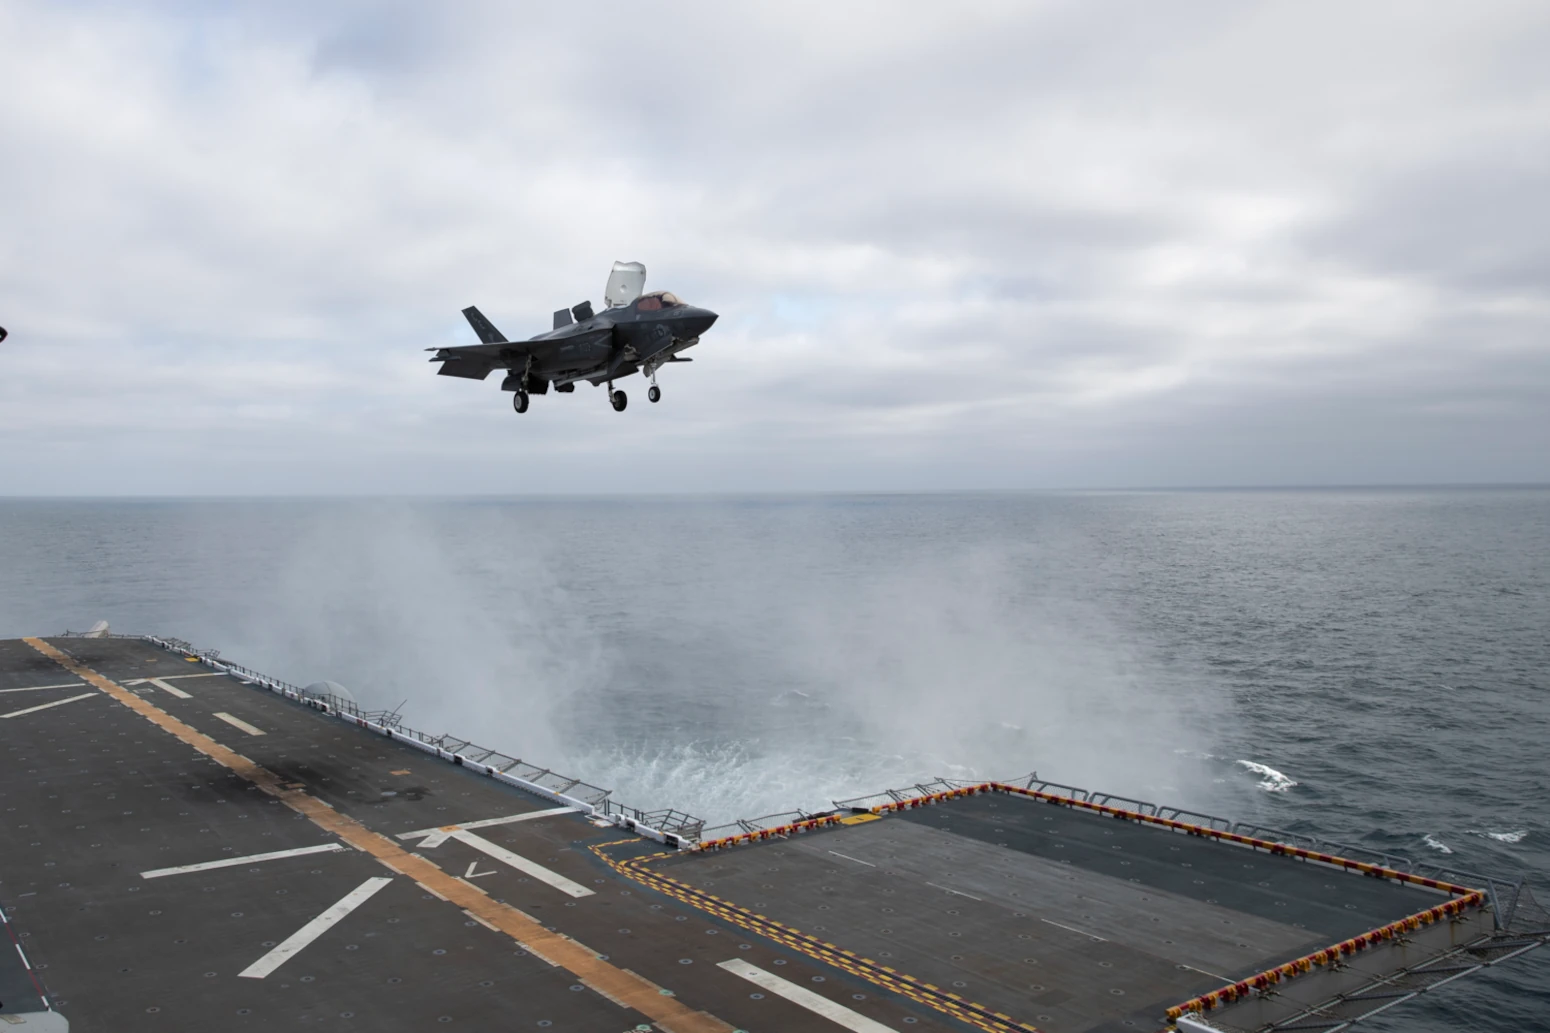 An F-35B Lightning II aircraft attached to Marine Fighter Attack Squadron 225 lands on the flight deck aboard the amphibious assault ship USS Tripoli